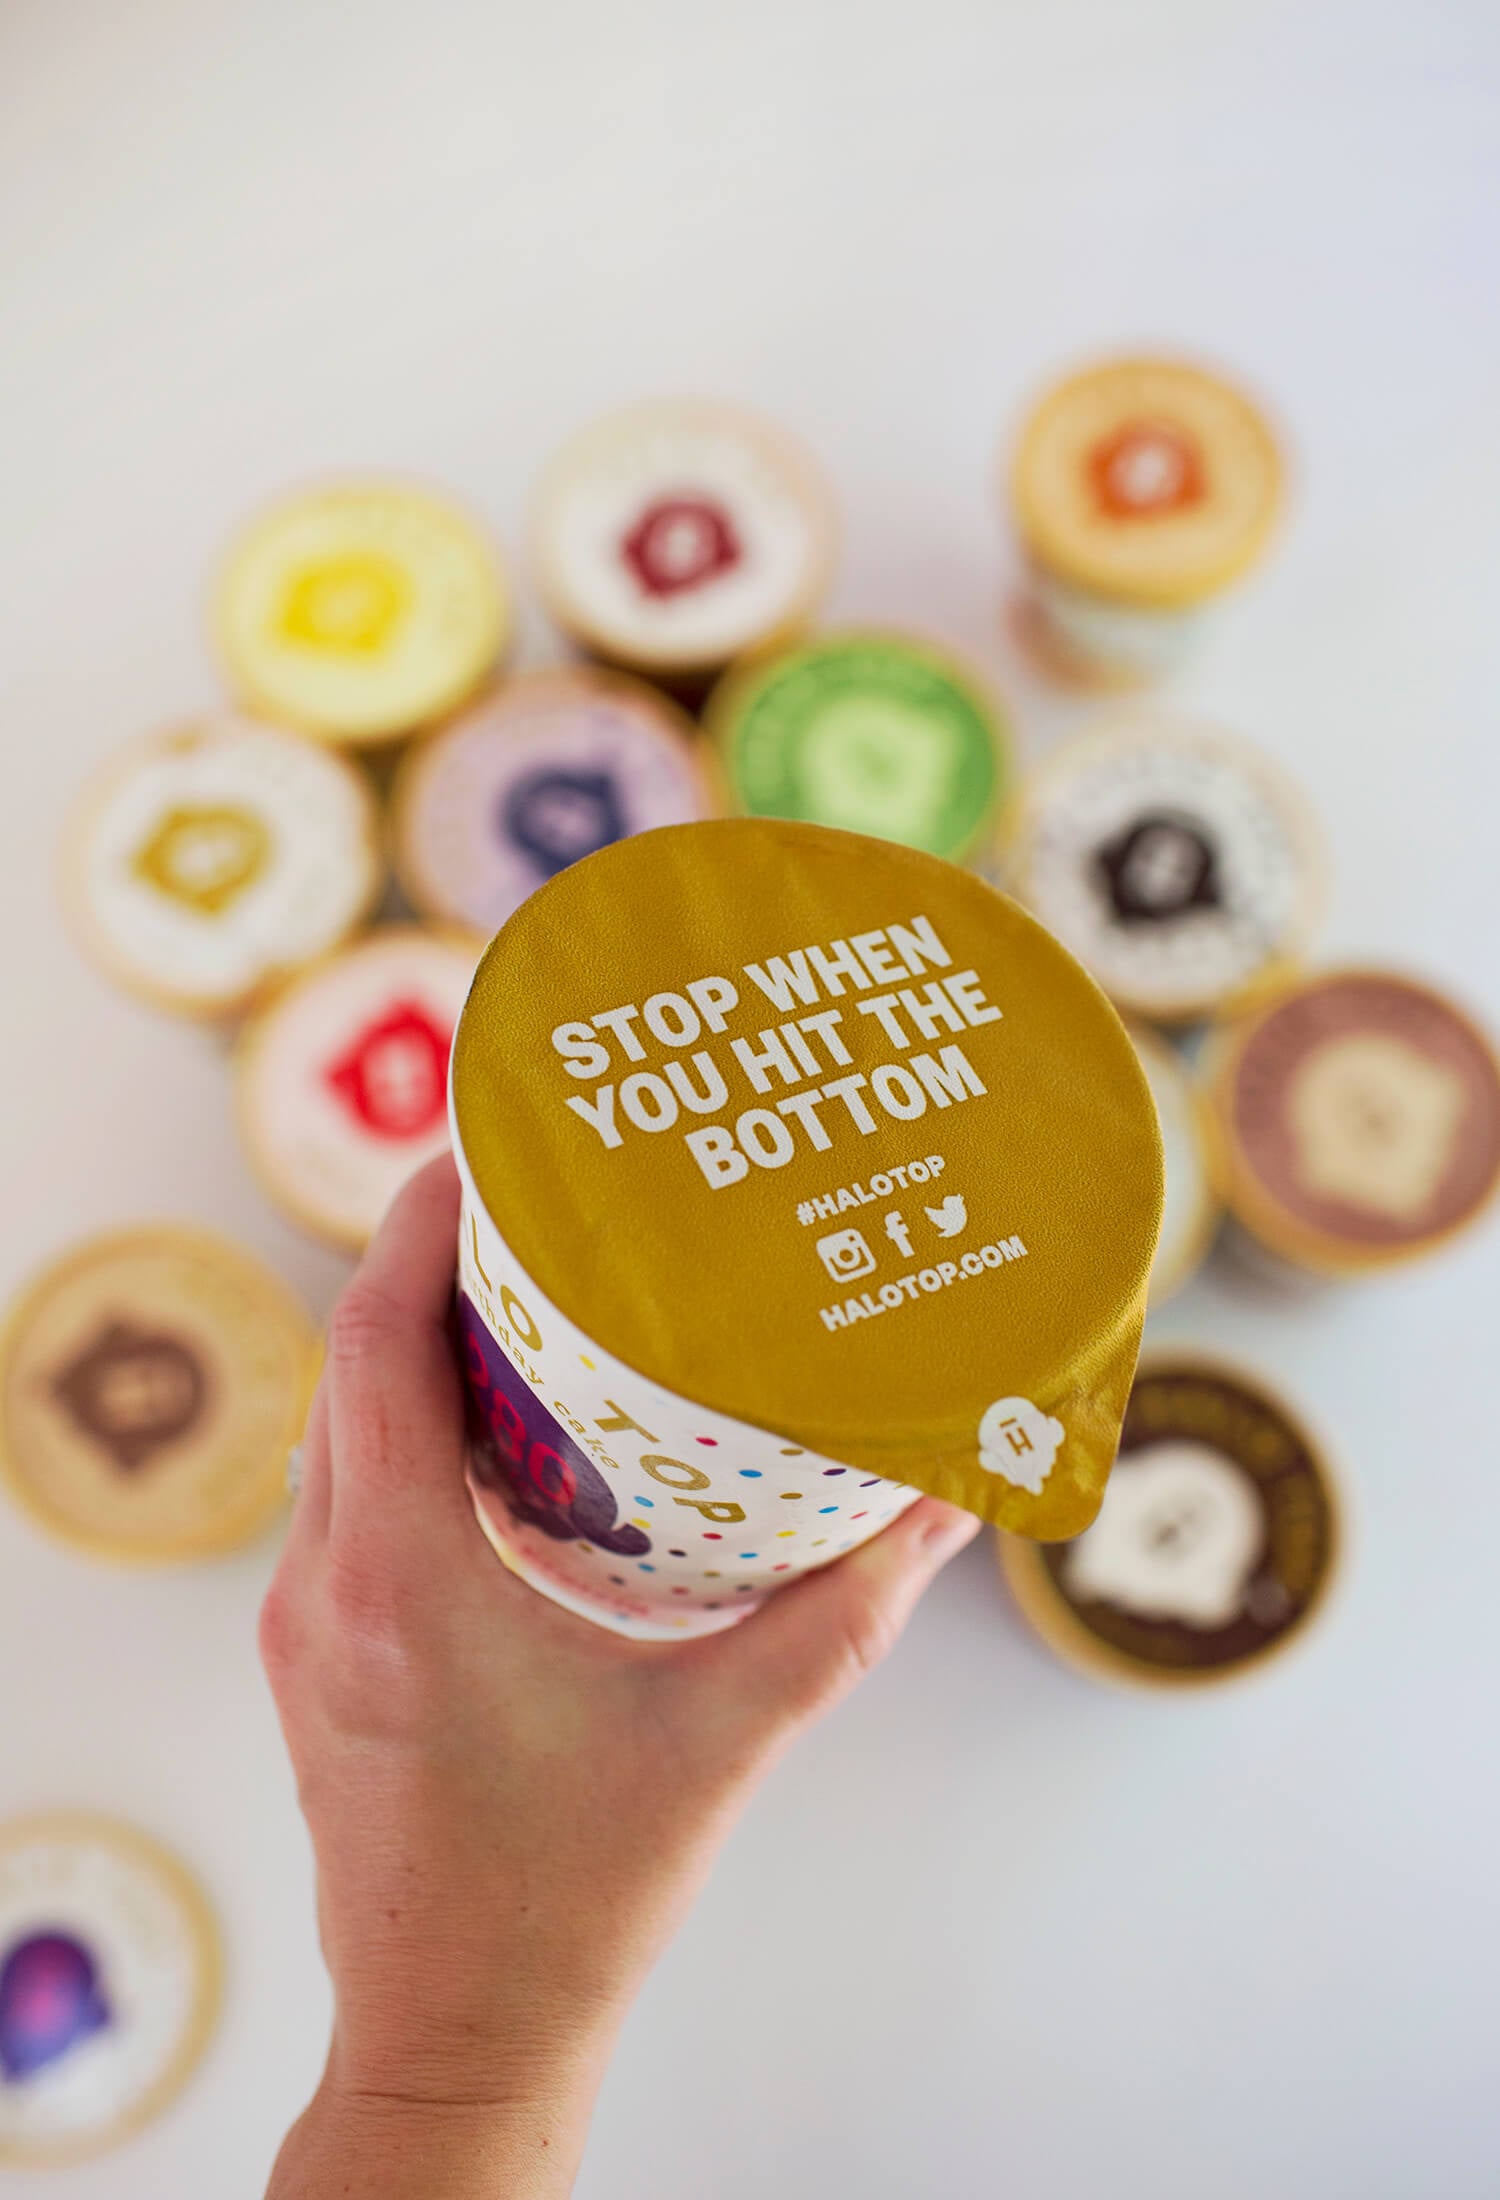 What's in Halo Top? | POPSUGAR Fitness